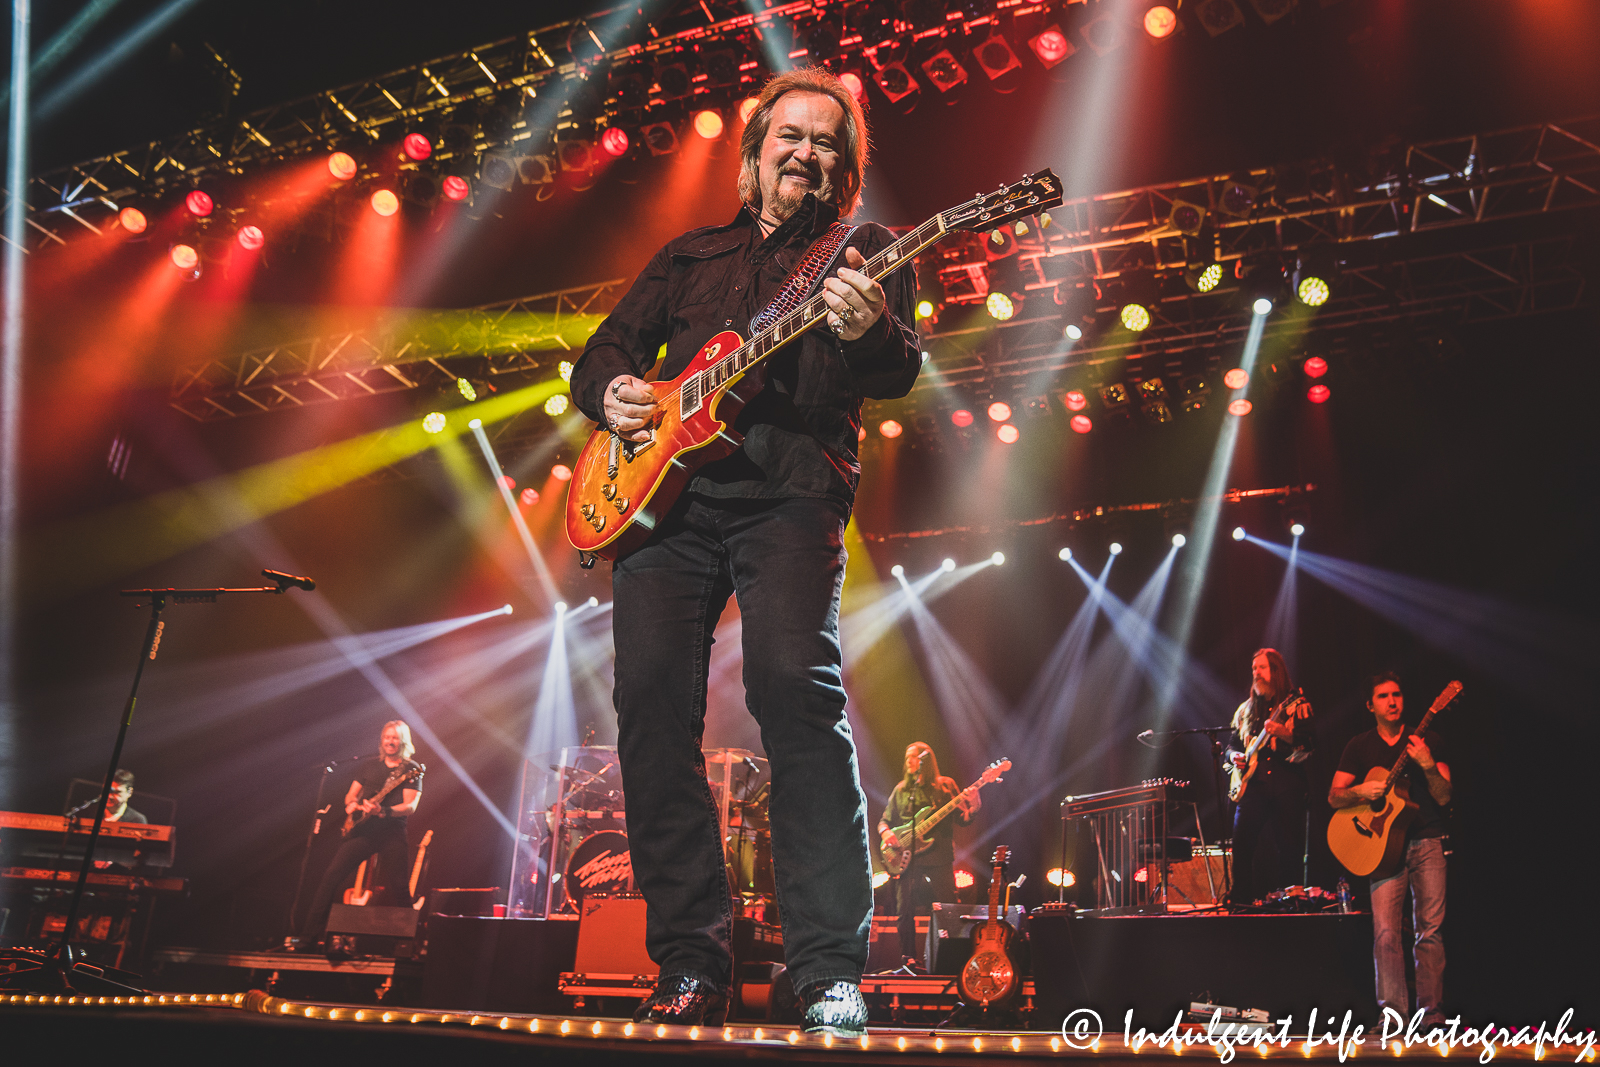 Travis Tritt playing to the camera as he riled up the Star Pavilion crowd at Ameristar Casino in Kansas City, MO on December 3, 2021.